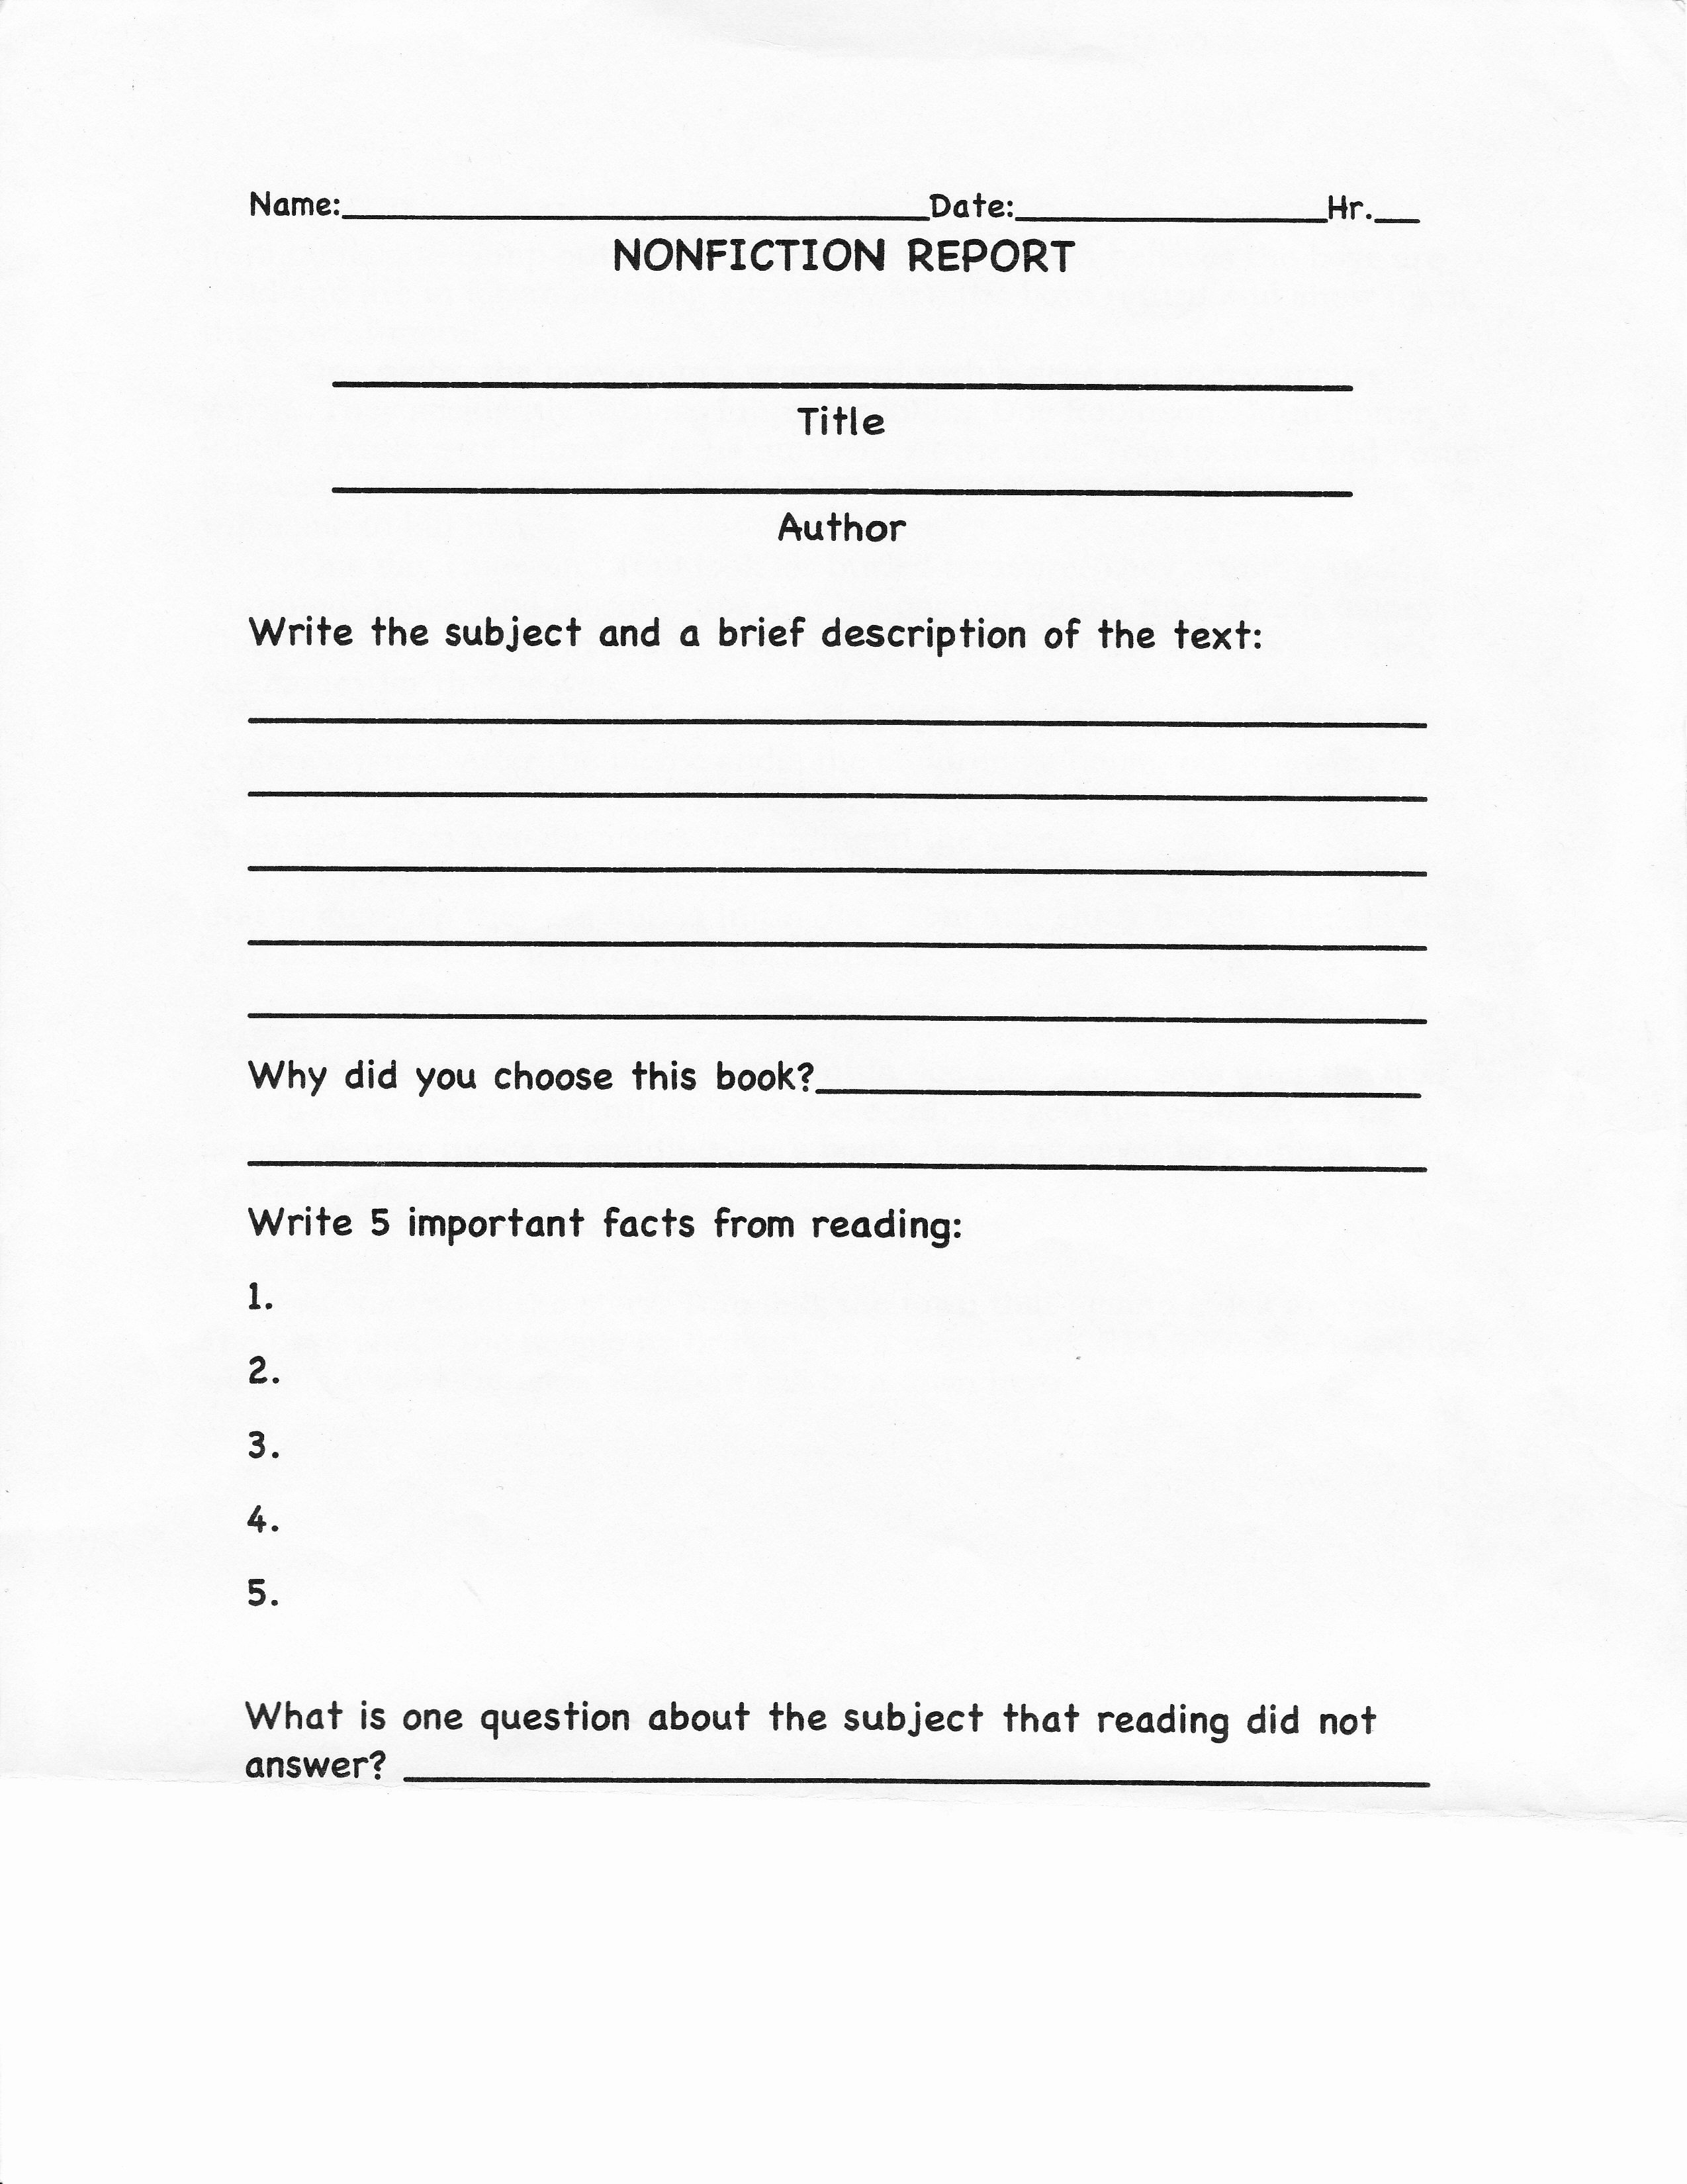 Nonfiction Book Report Template Lovely Image Result for Nonfiction Book Report Template College